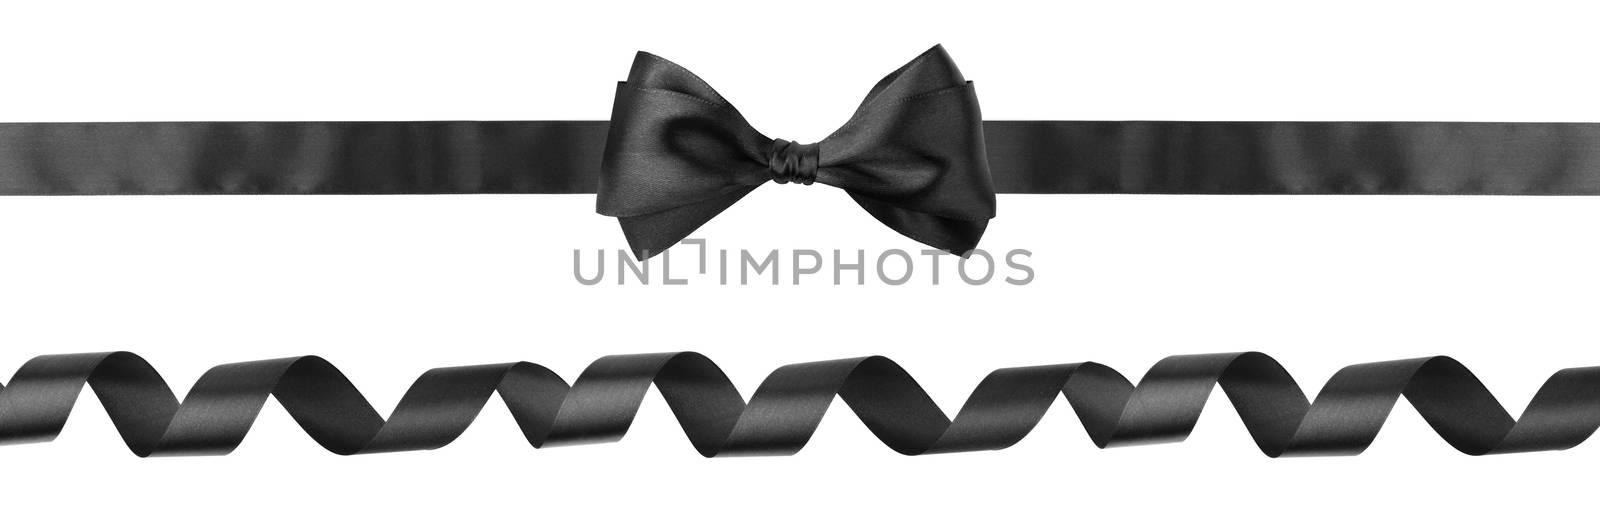 Black curly ribbon and bow isolated on white background, Black friday gift sale concept